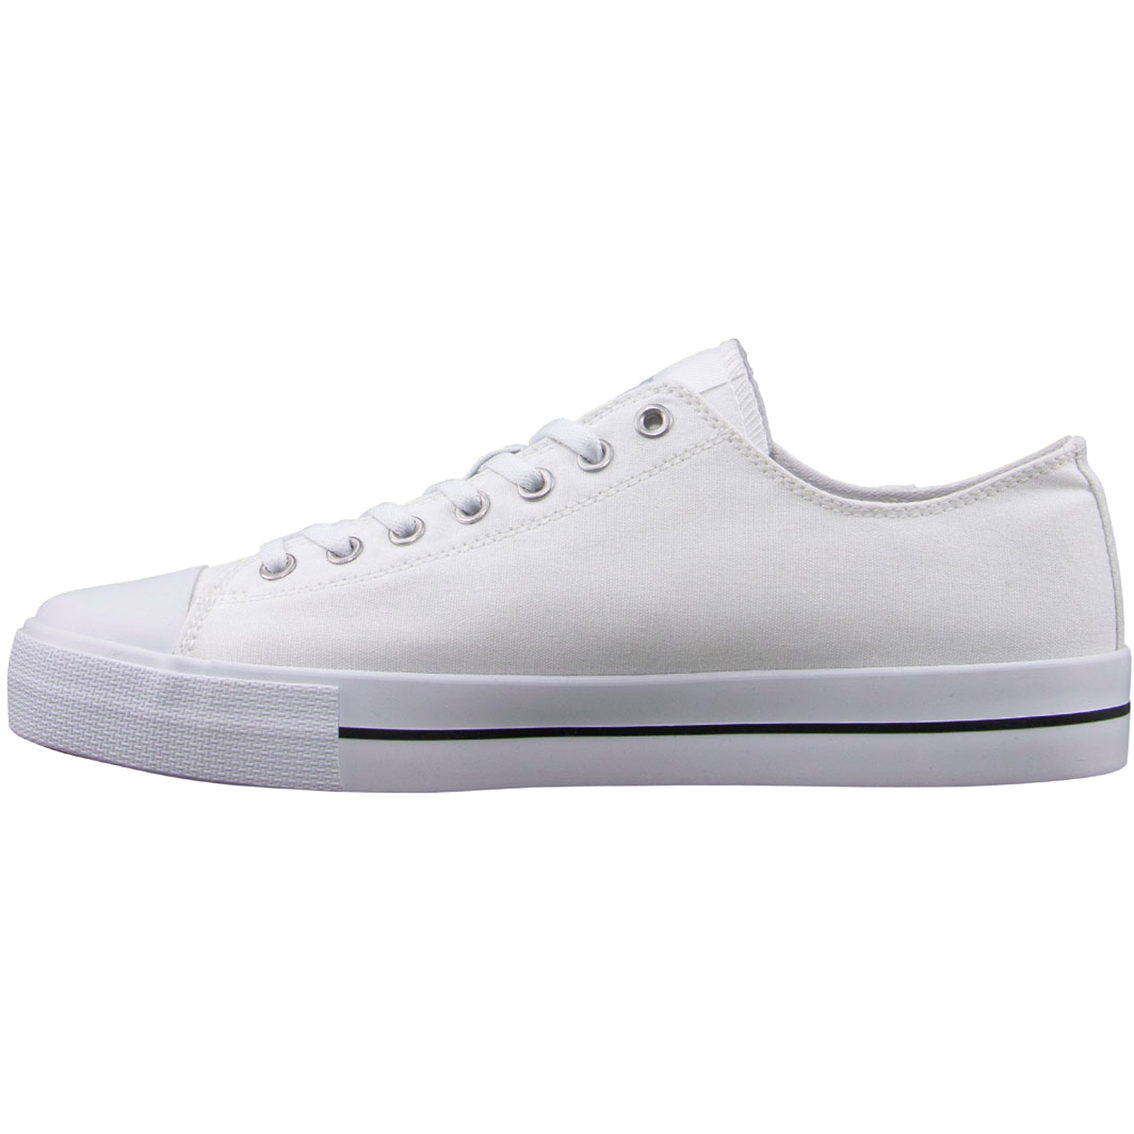 Lugz Men's Stagger Lo Sneakers - Image 4 of 6